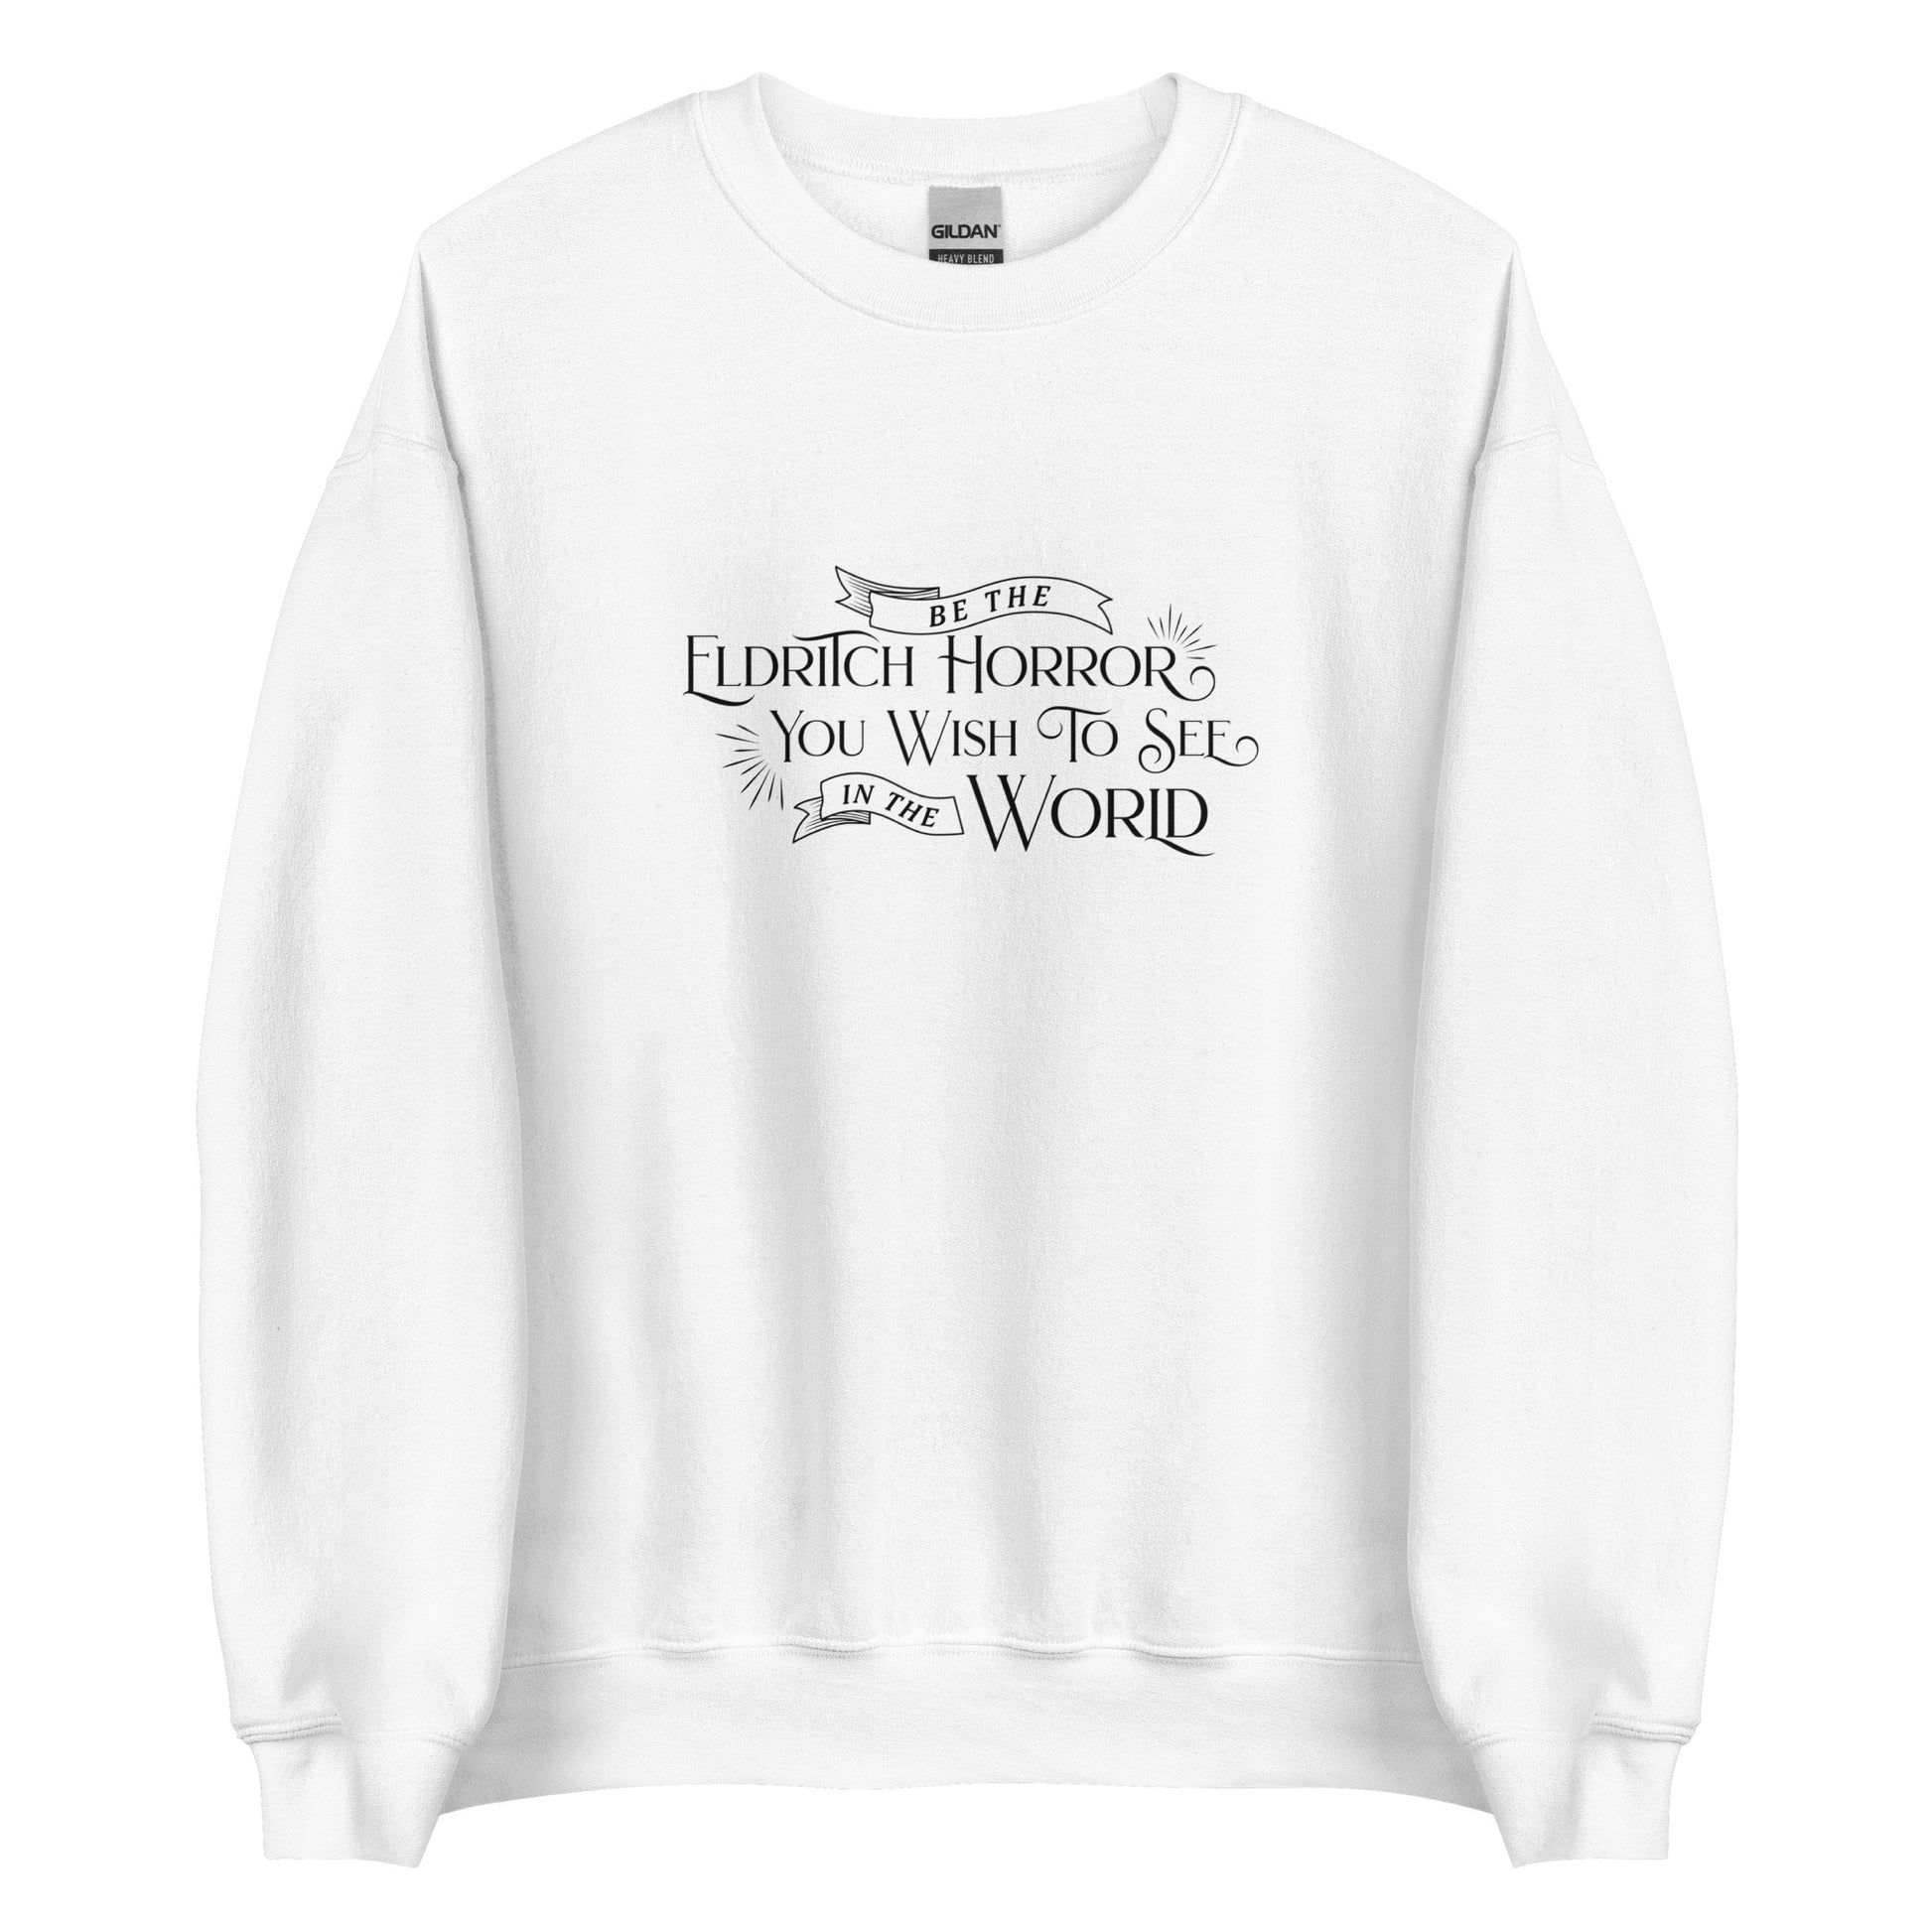 A white crewneck sweatshirt with black old-fashioned text that reads "Be The Eldritch Horror You Wish To See In The World"